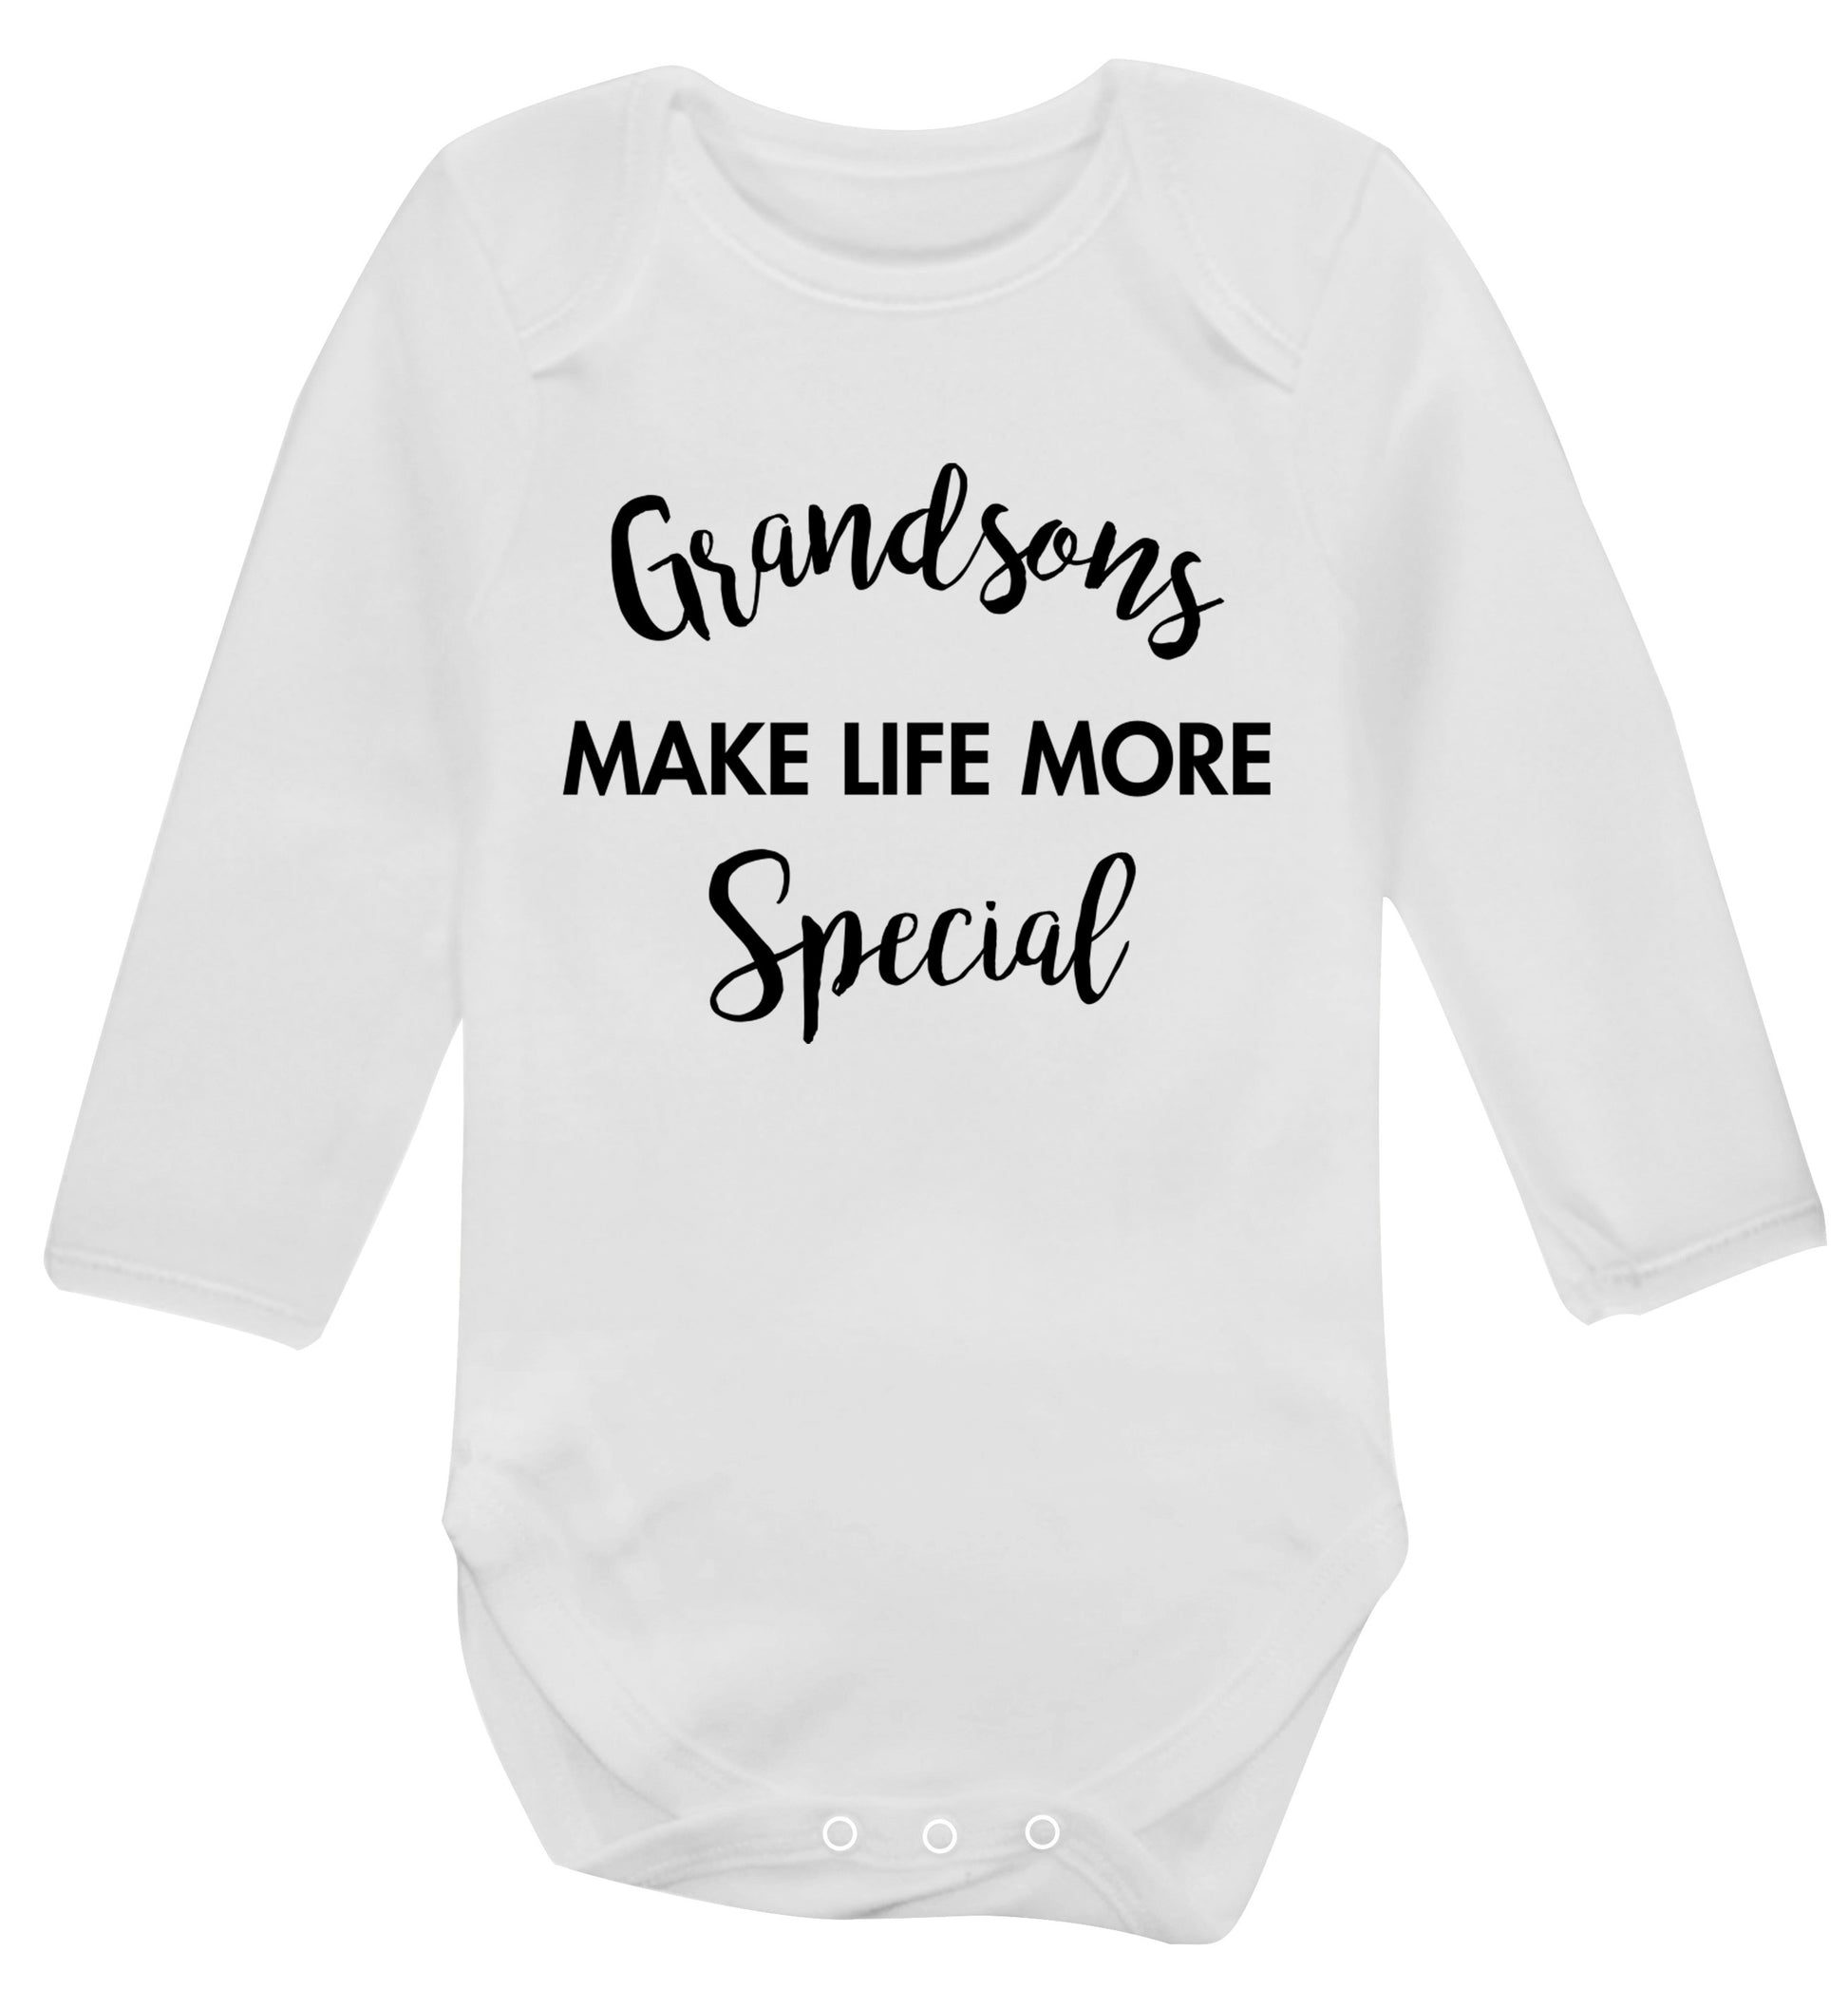 Grandsons make life more special Baby Vest long sleeved white 6-12 months